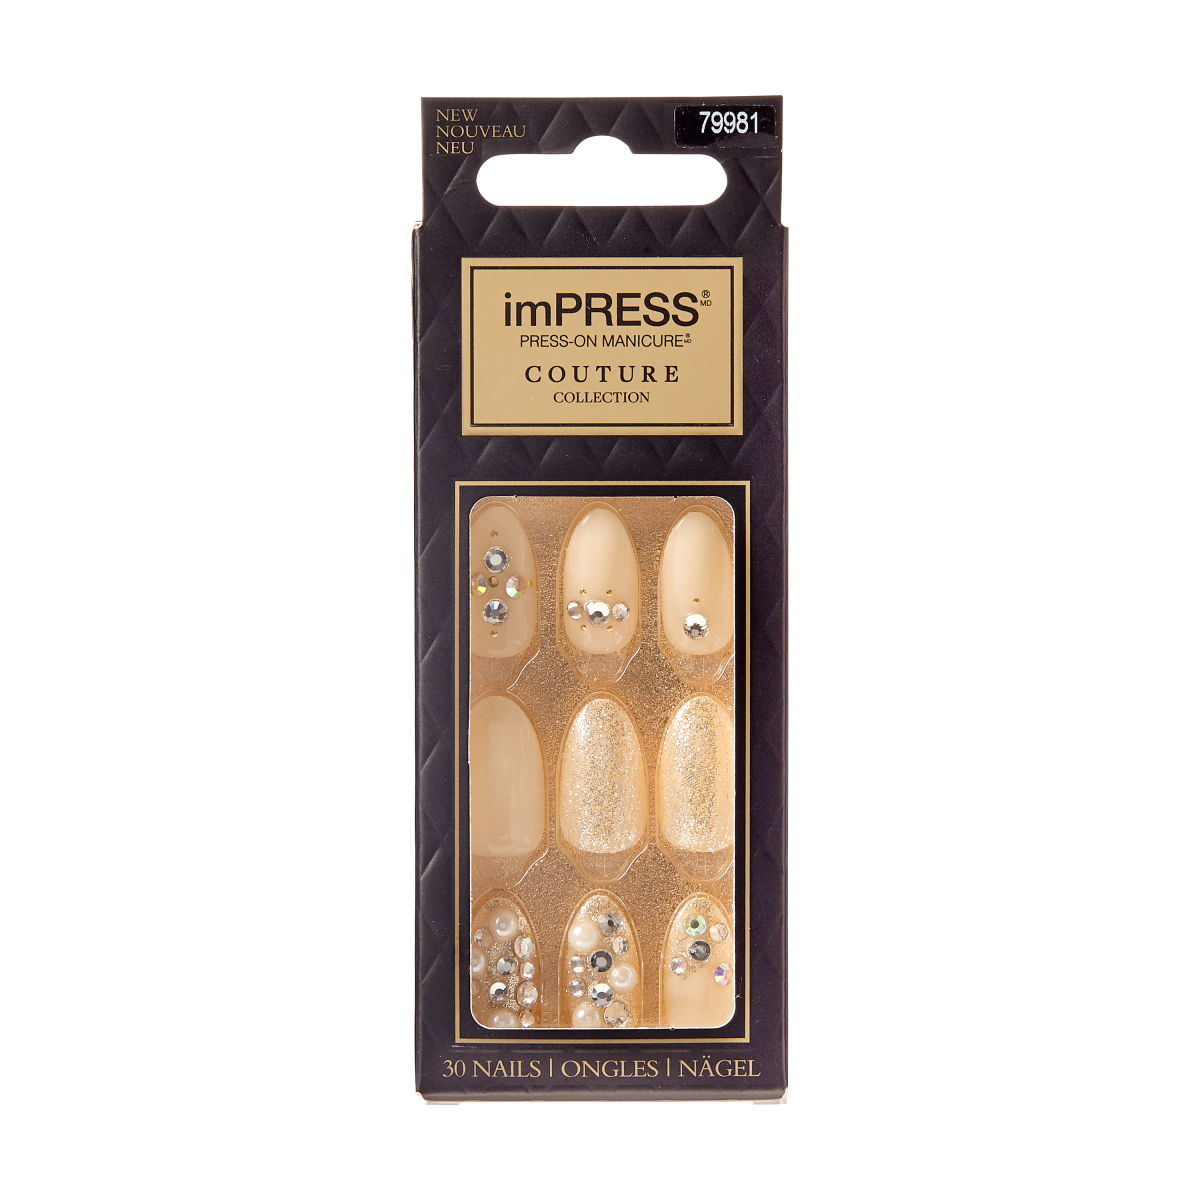 imPRESS Press-On Manicure Couture Collection  Luxurious